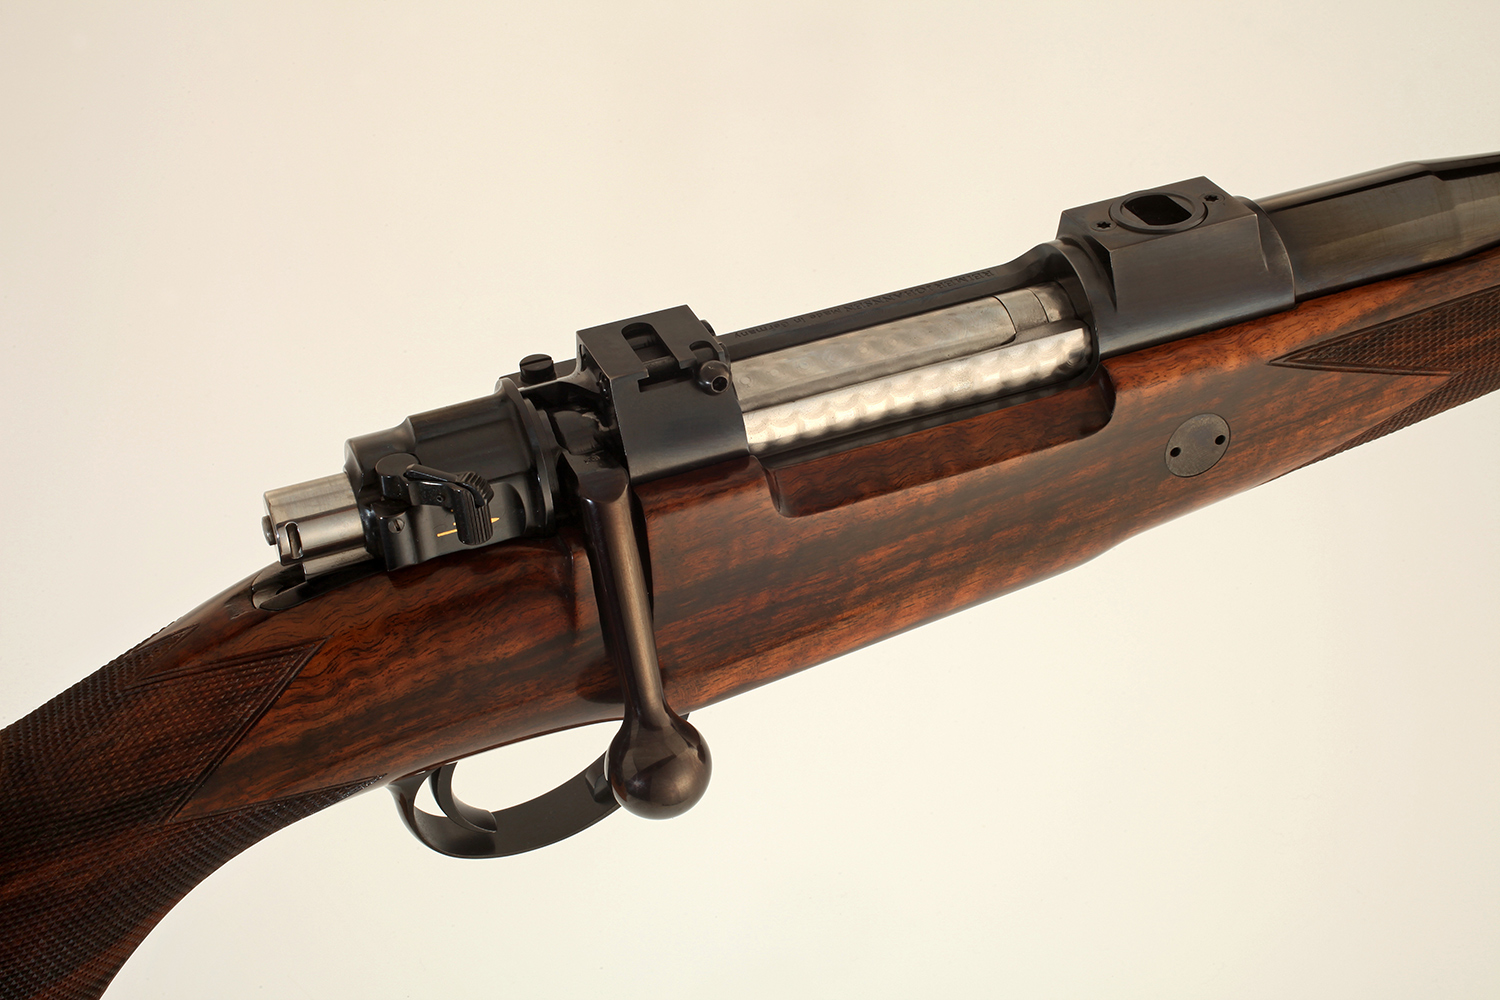 Mauser Rifle Pics, Weapons Collection